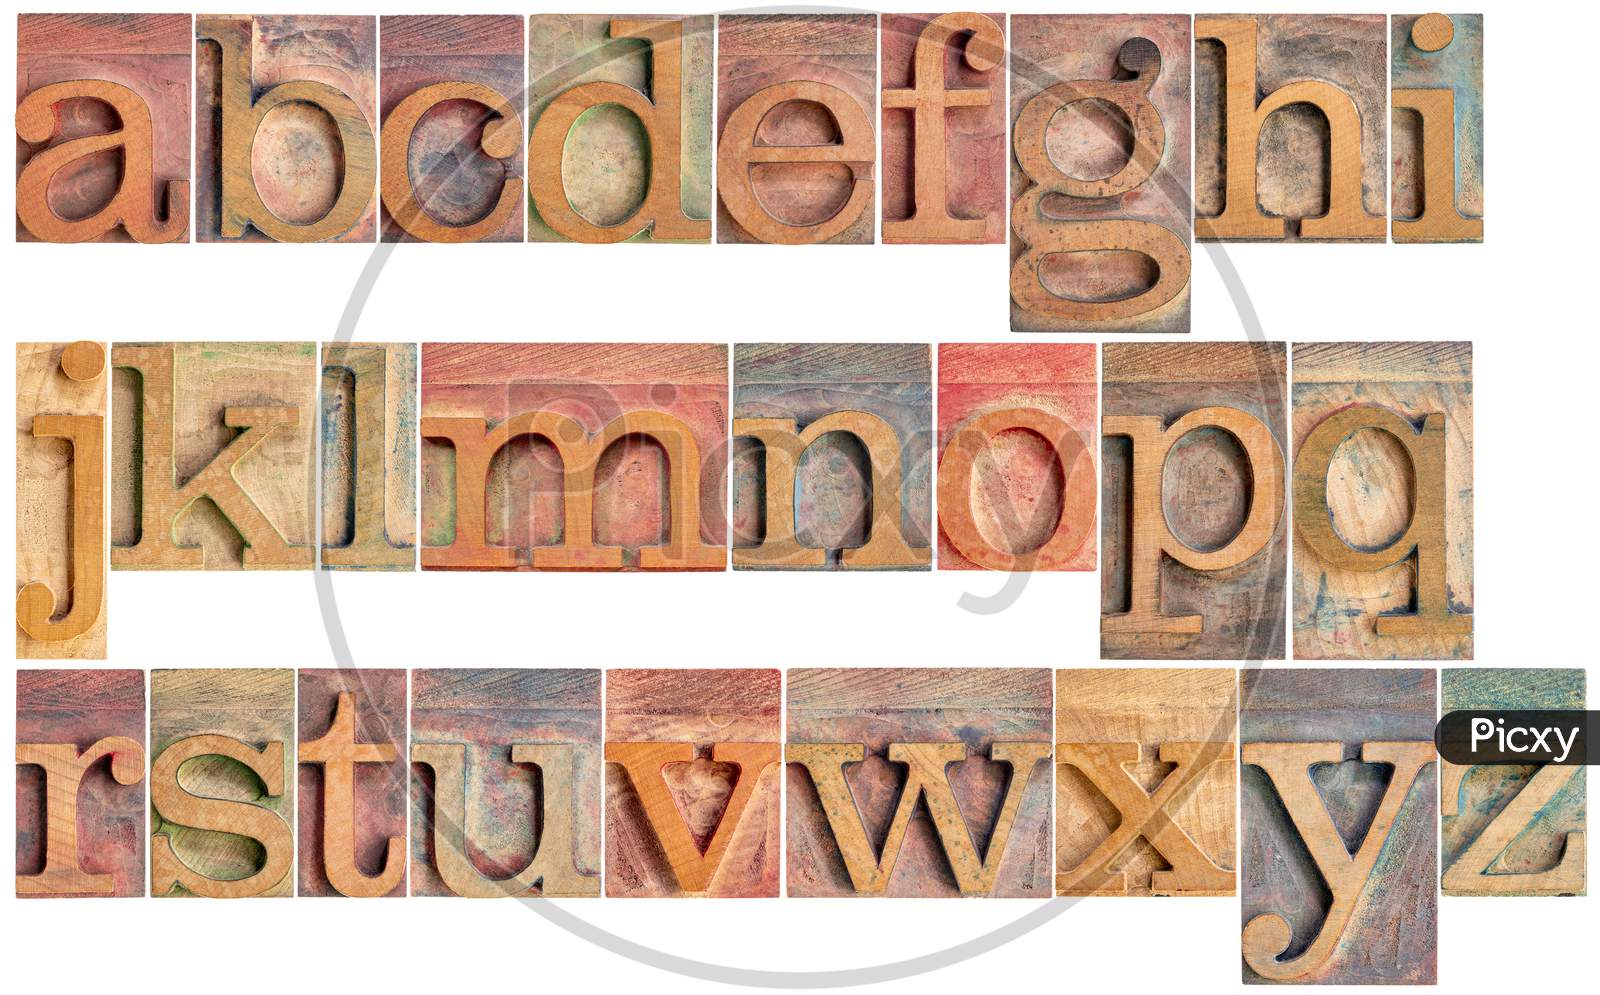 Complete English Lowercase Alphabet - A High Resolution Collage Of 26 Isolated Vintage Wood Letterpress Printing Blocks, Stained By Color Inks